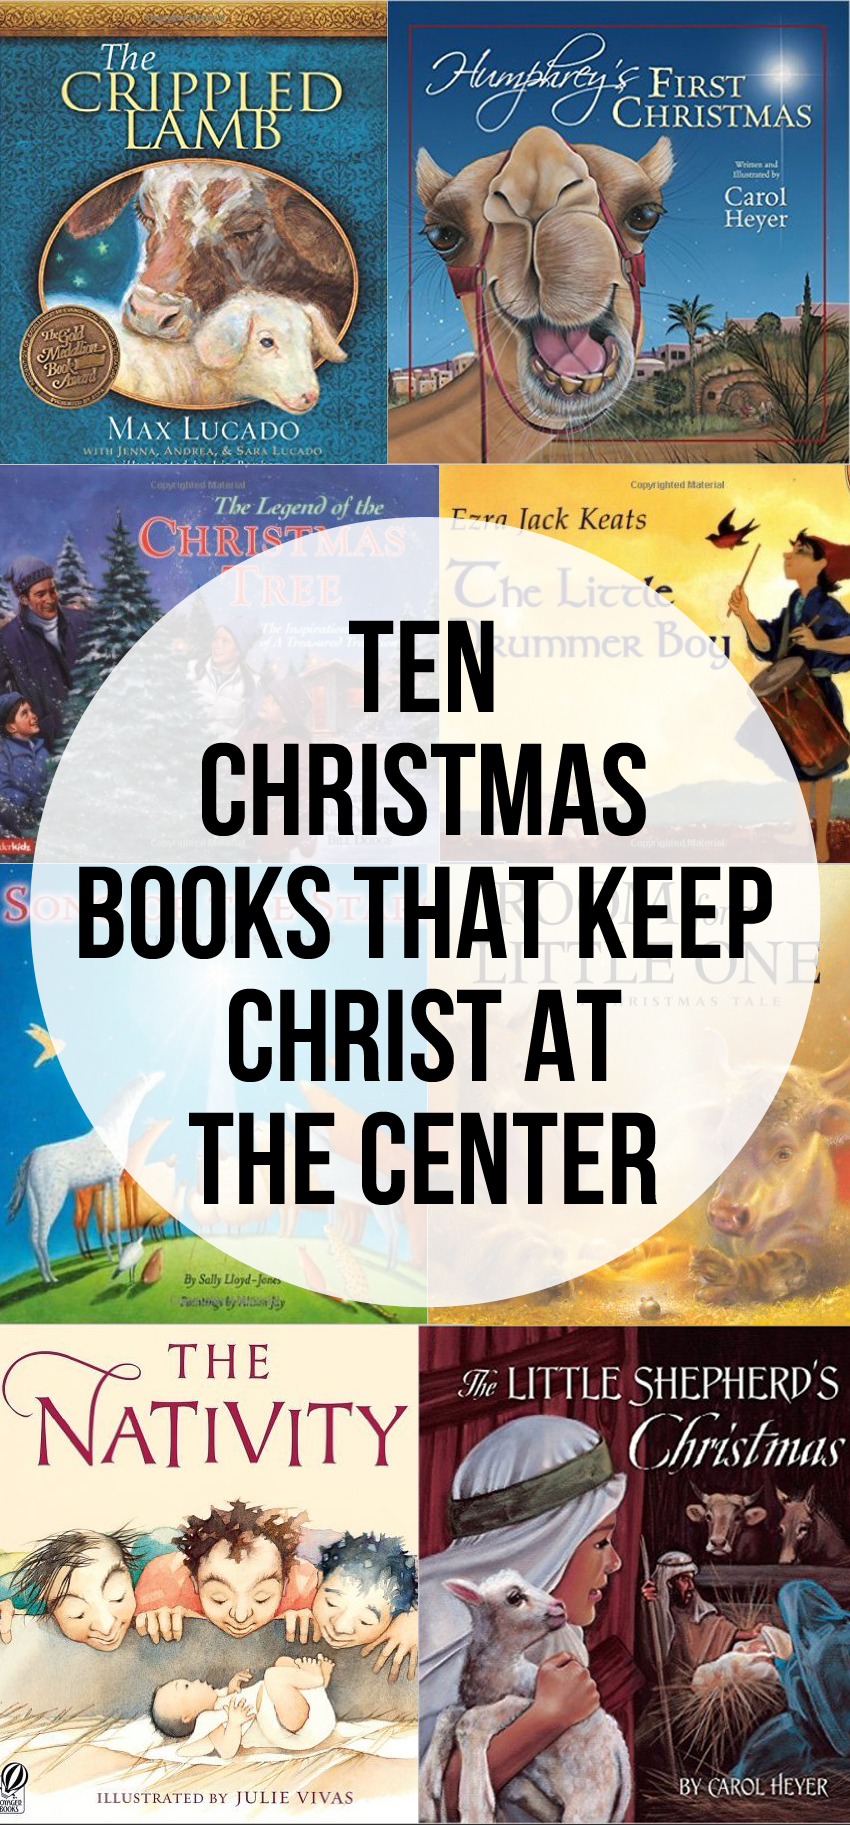 Ten Christmas Books the keep Christ at the Center. Ten Christian Christmas Books.